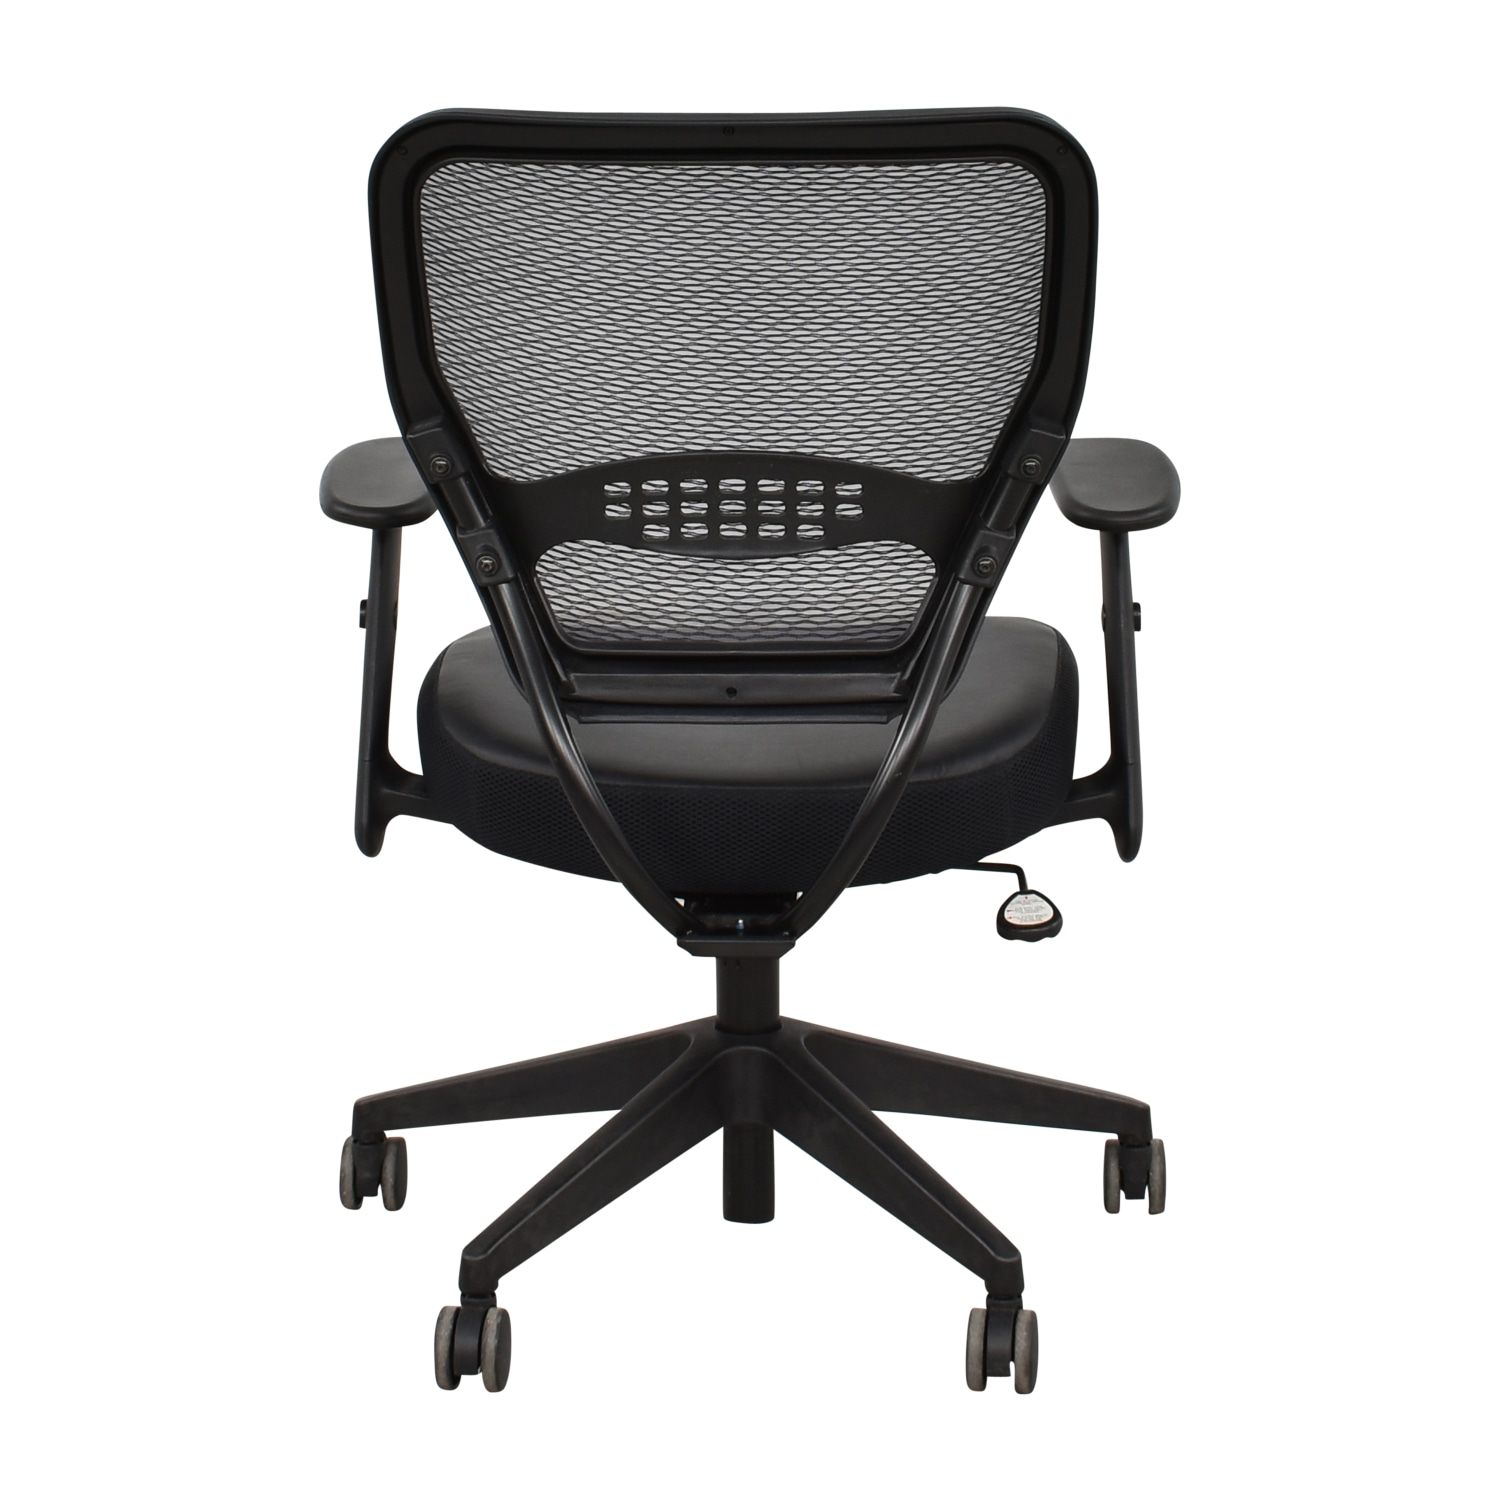 https://res.cloudinary.com/dkqtxtobb/image/upload/f_auto,q_auto:best,w_1500/product-assets/237070/office-star/chairs/accent-chairs/sell-office-star-managers-chair.jpeg